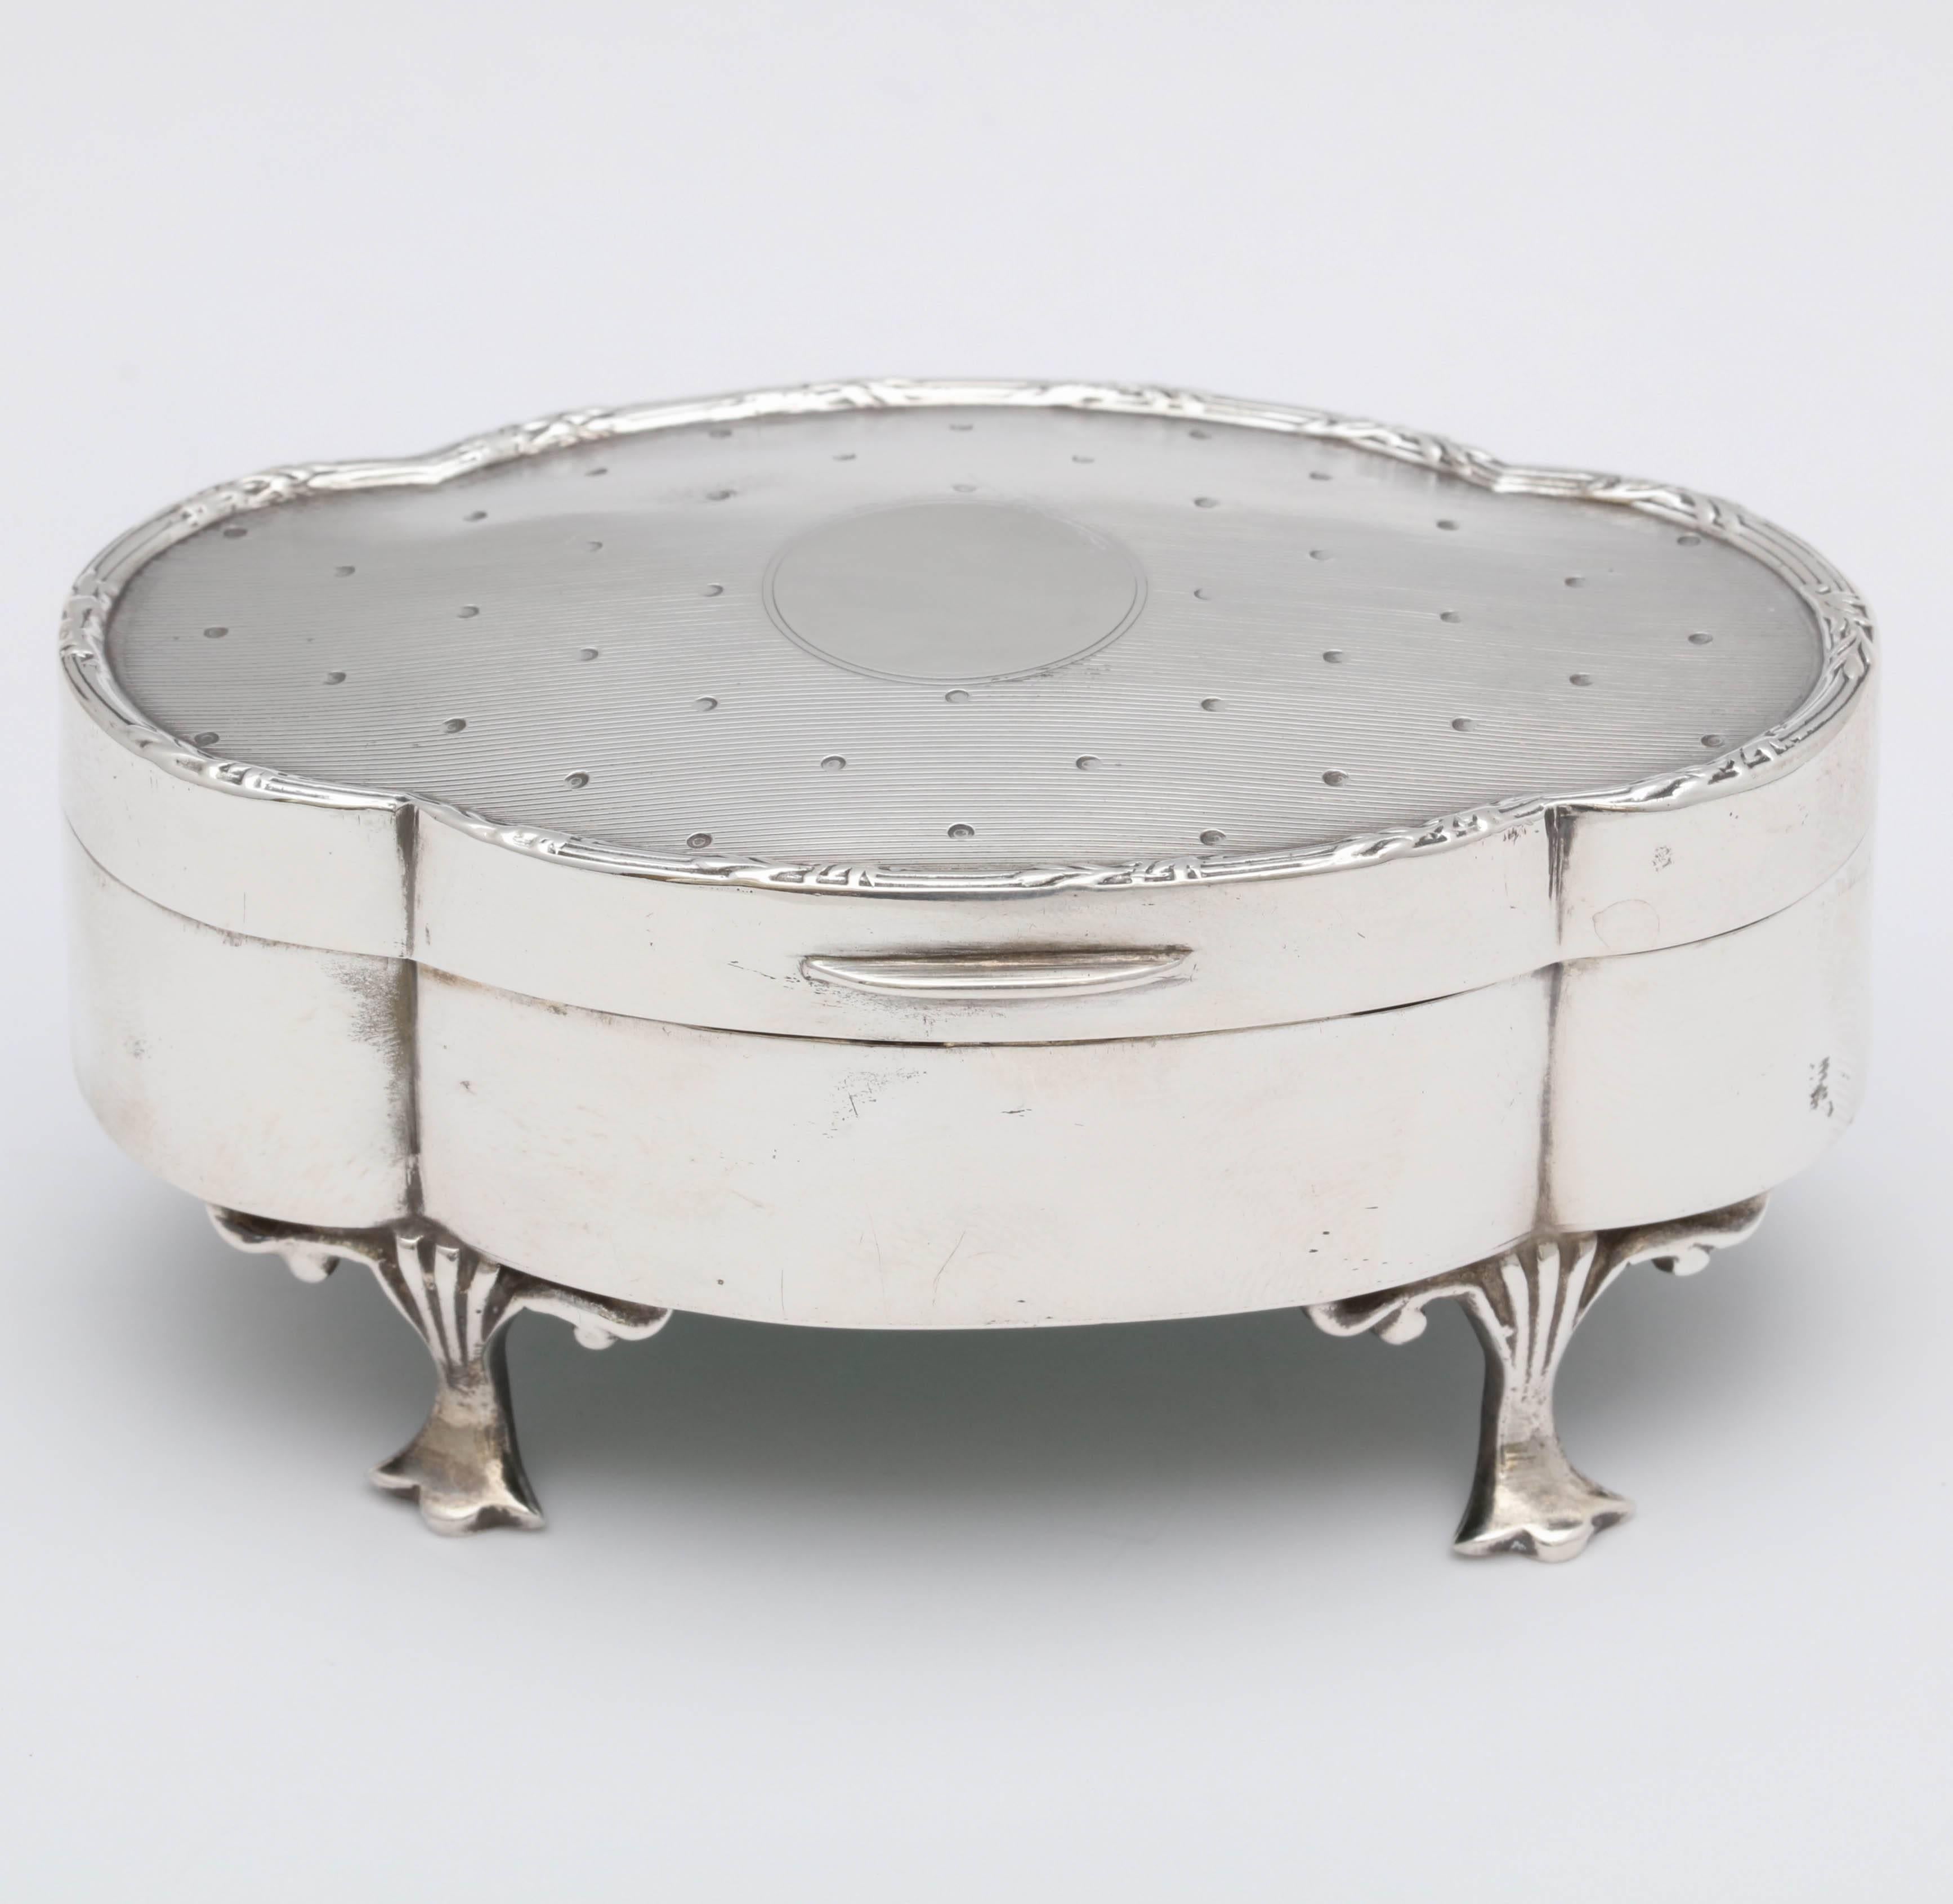 Art Deco, sterling silver, jewelry box on paw feet, Birmingham, England, 1918, H. Matthews - Maker. Over 1 3/4 inches high x over 3 3/4 inches wide x 2 1/4 inches deep; weights 2.580 troy ounces. Underside of lid is gilded. Design on lid makes the